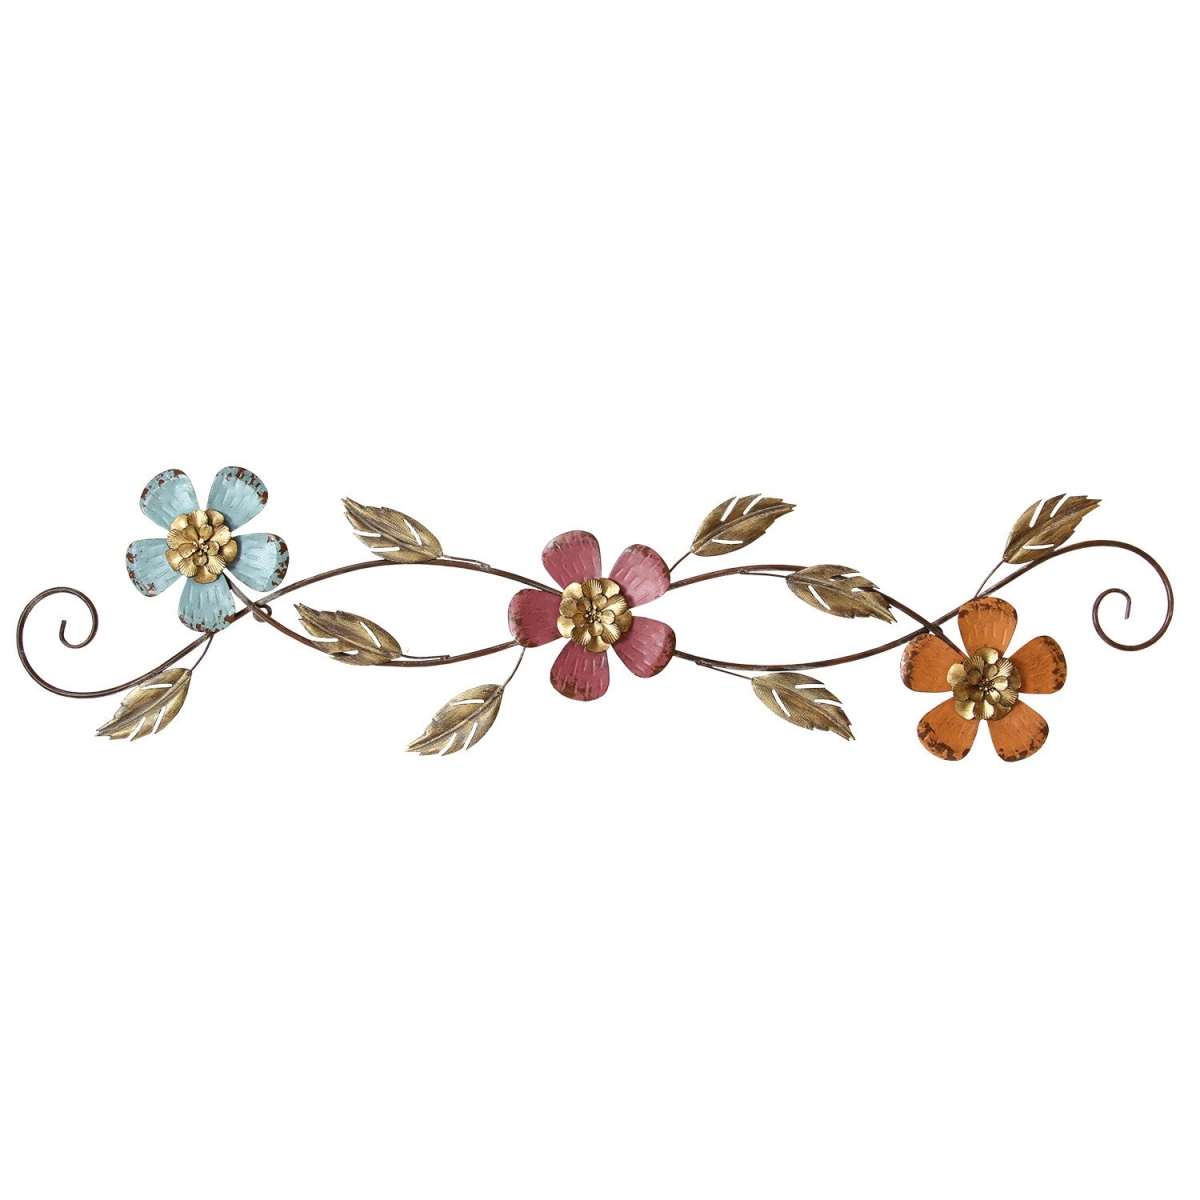 Home Roots 321075 Floral Scroll Wall Decor, Multicolor